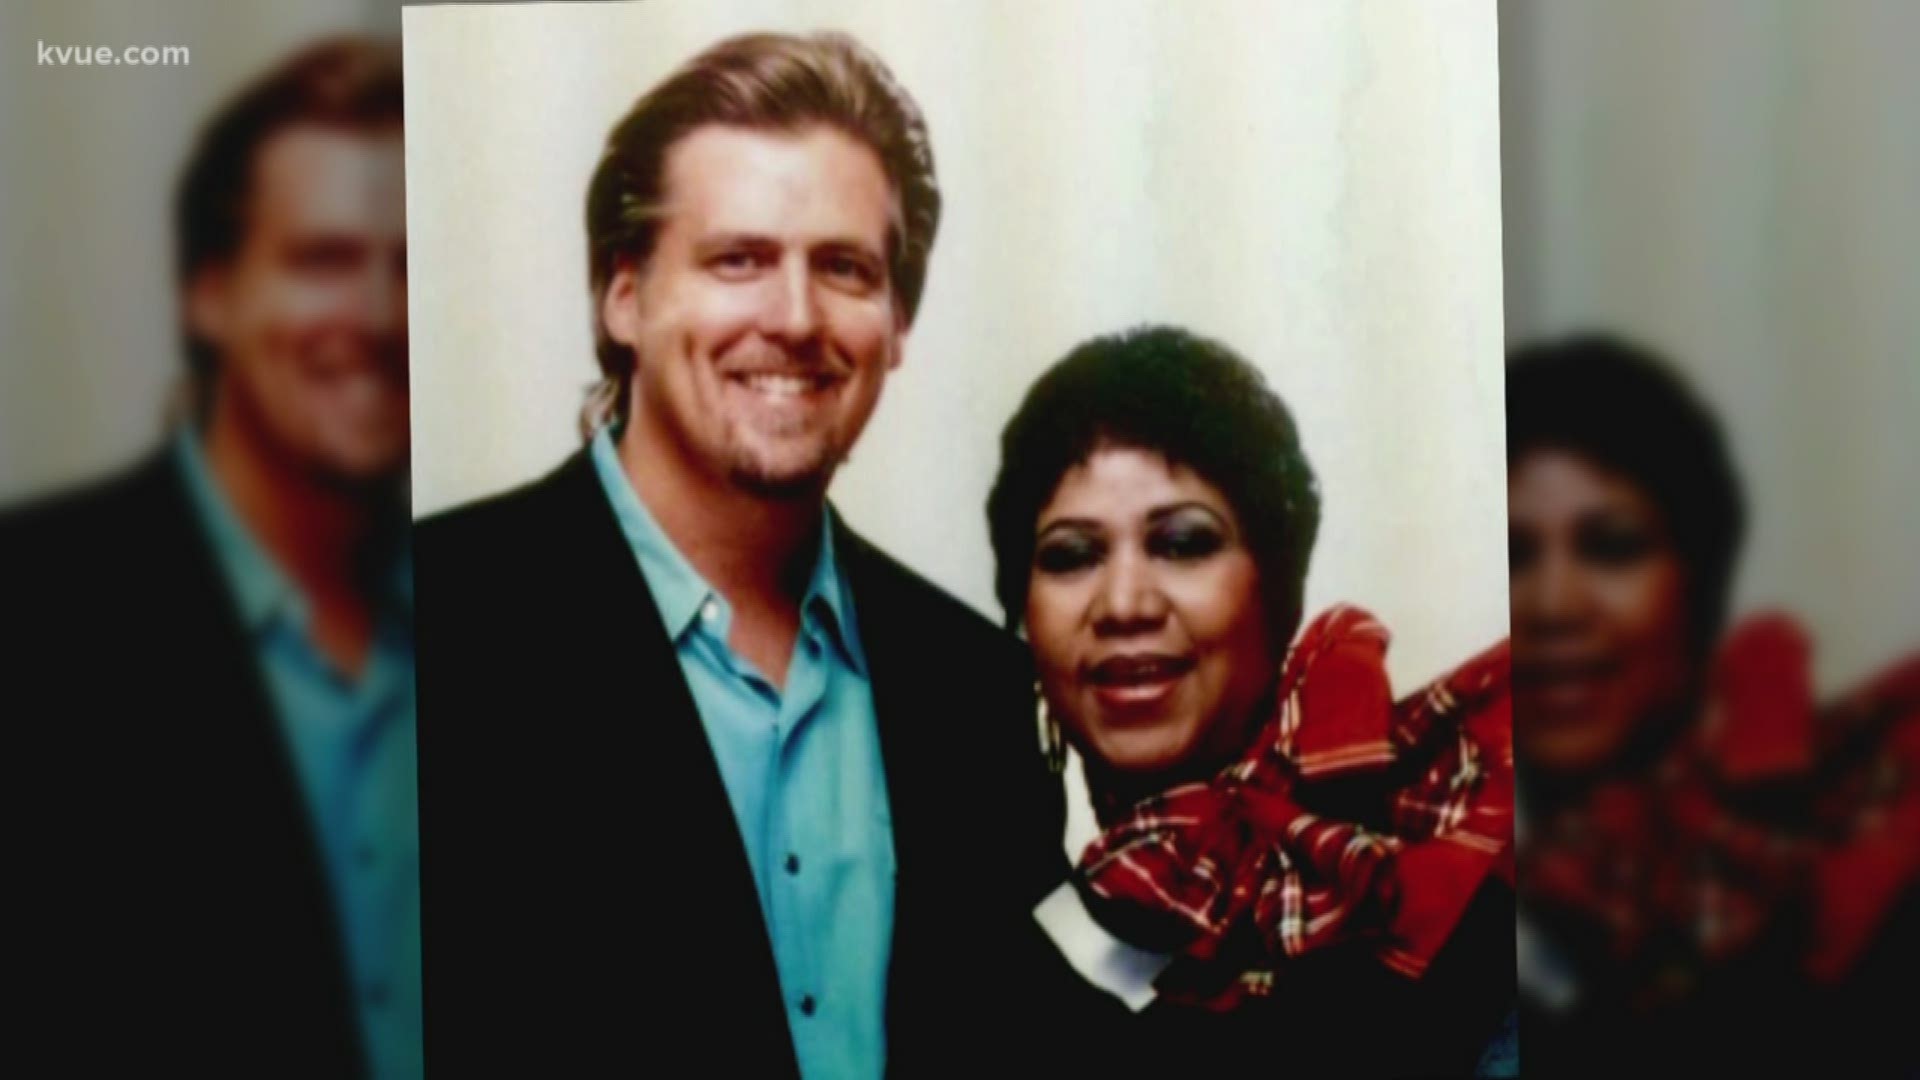 Aretha Franklin left quite an impression on one of Austin's own legendary business leaders.